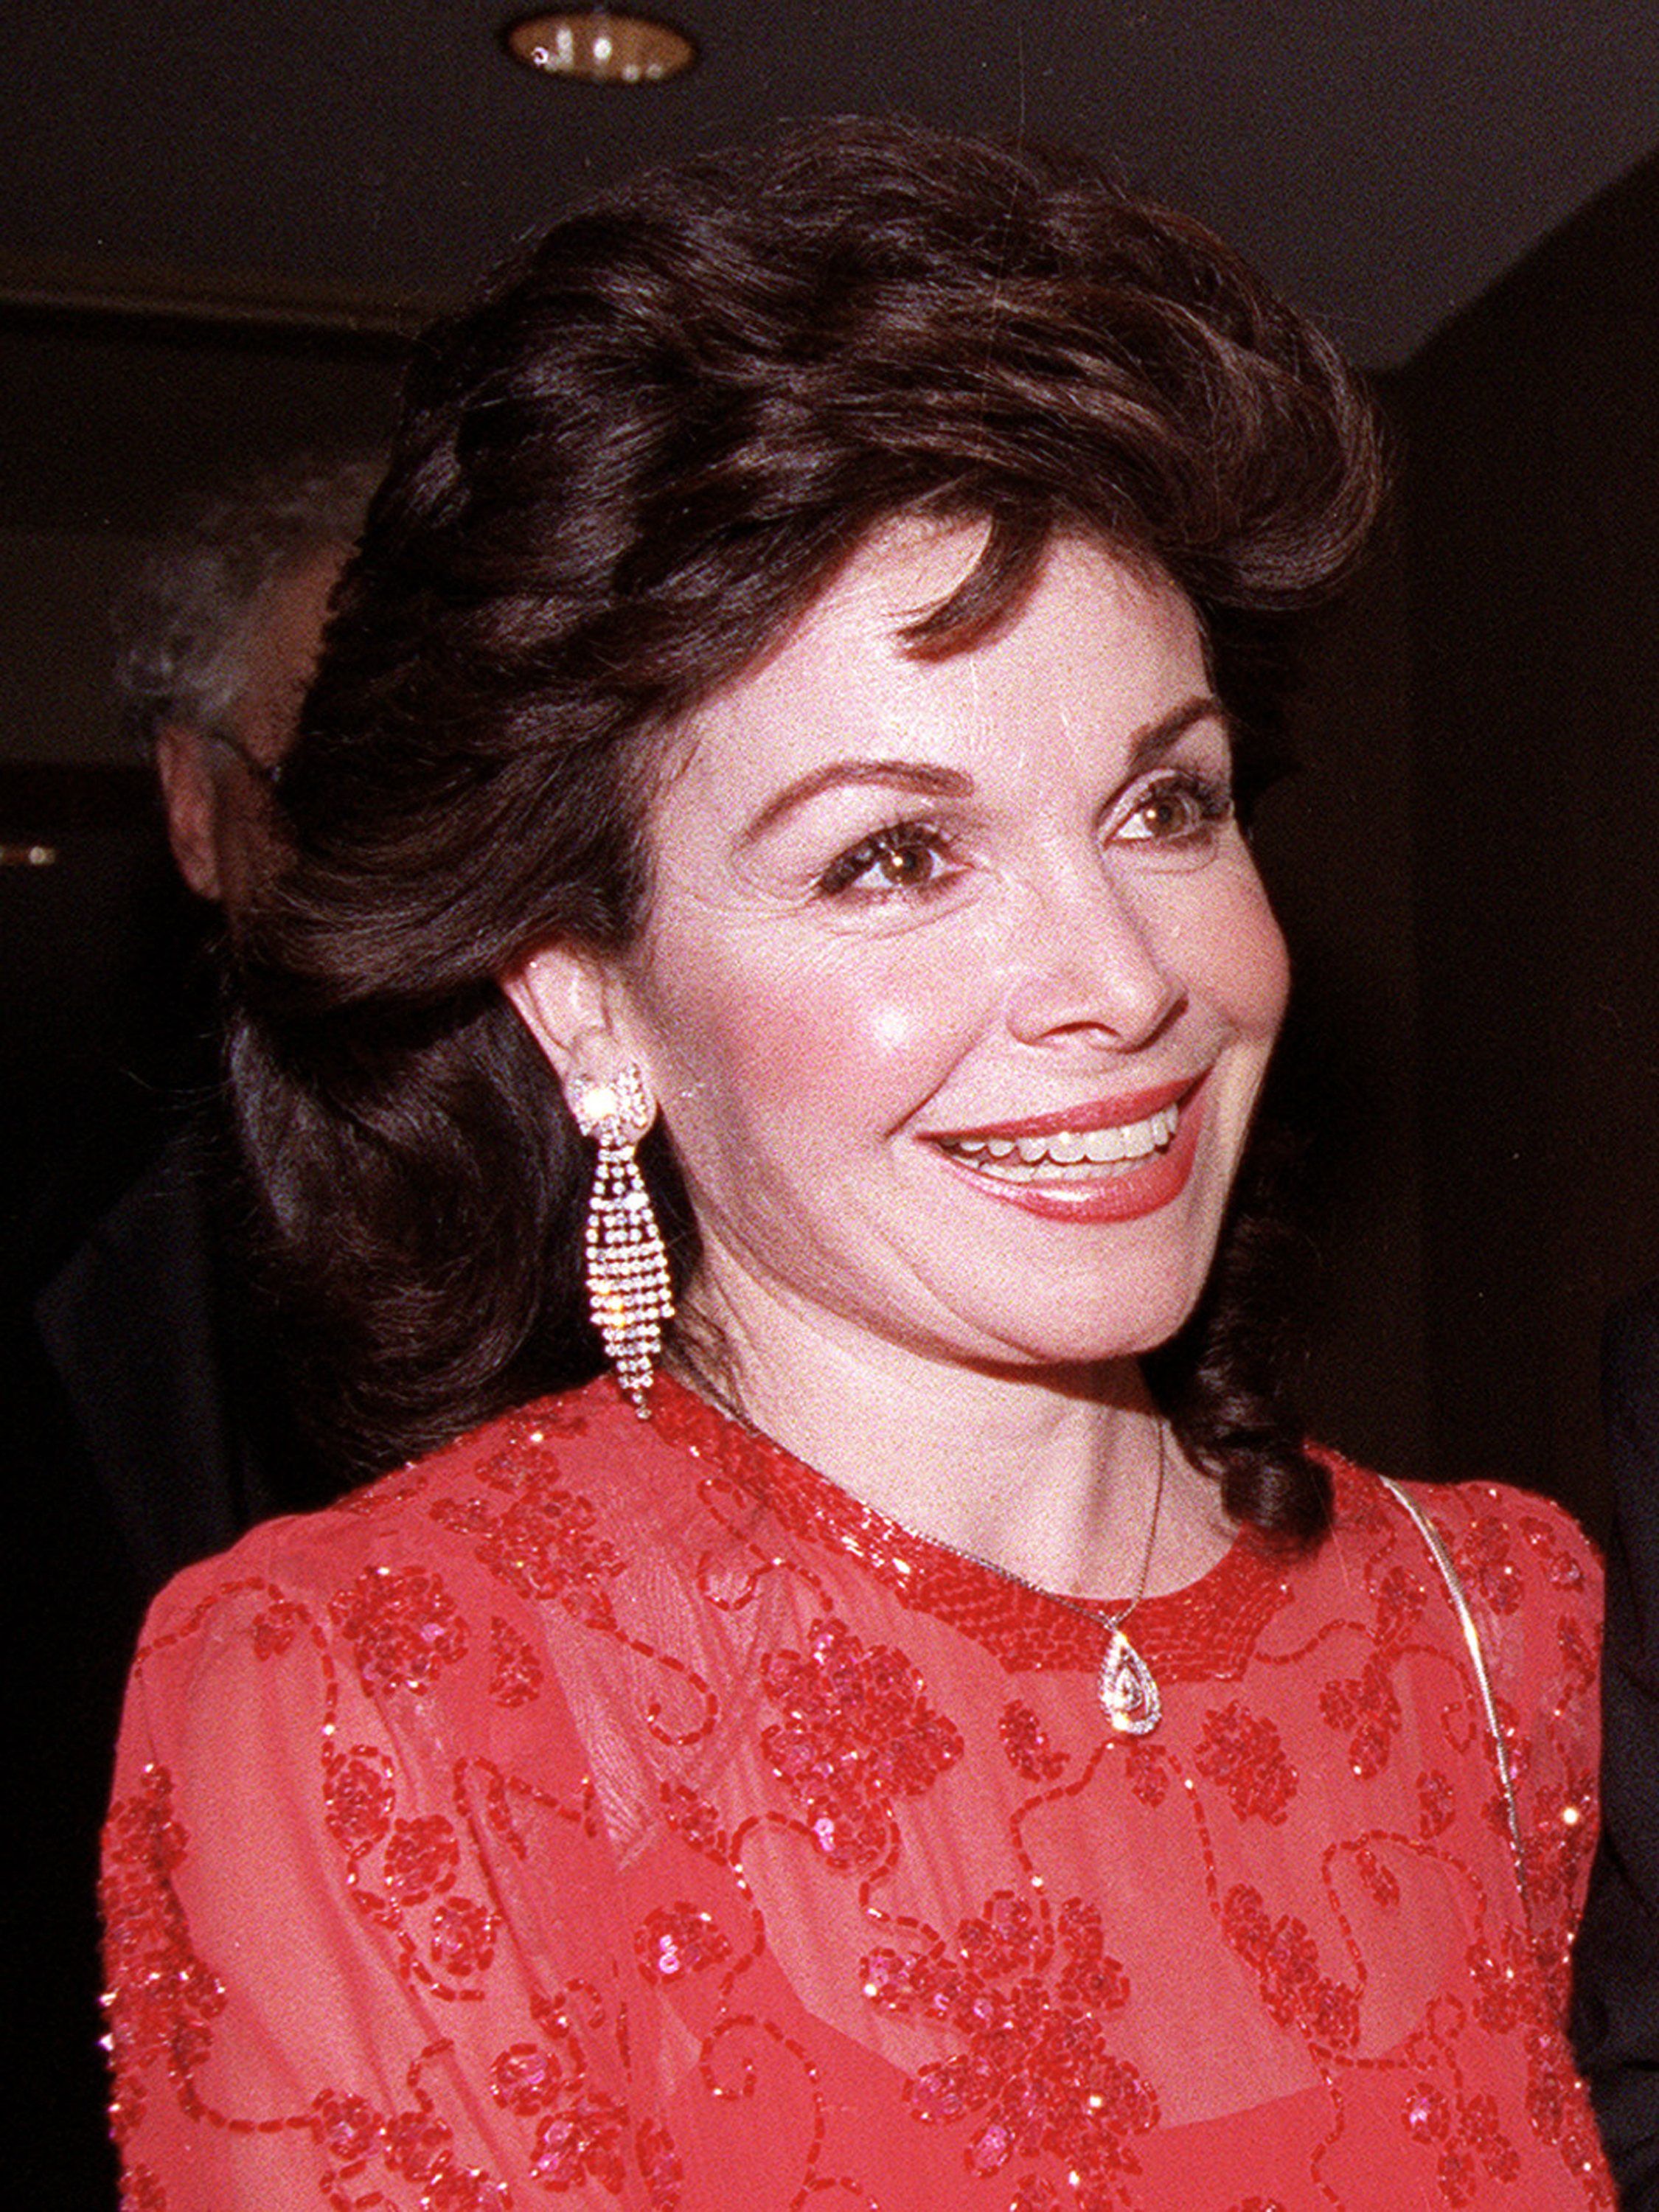 Mickey Mouse Club's Annette Funicello dies